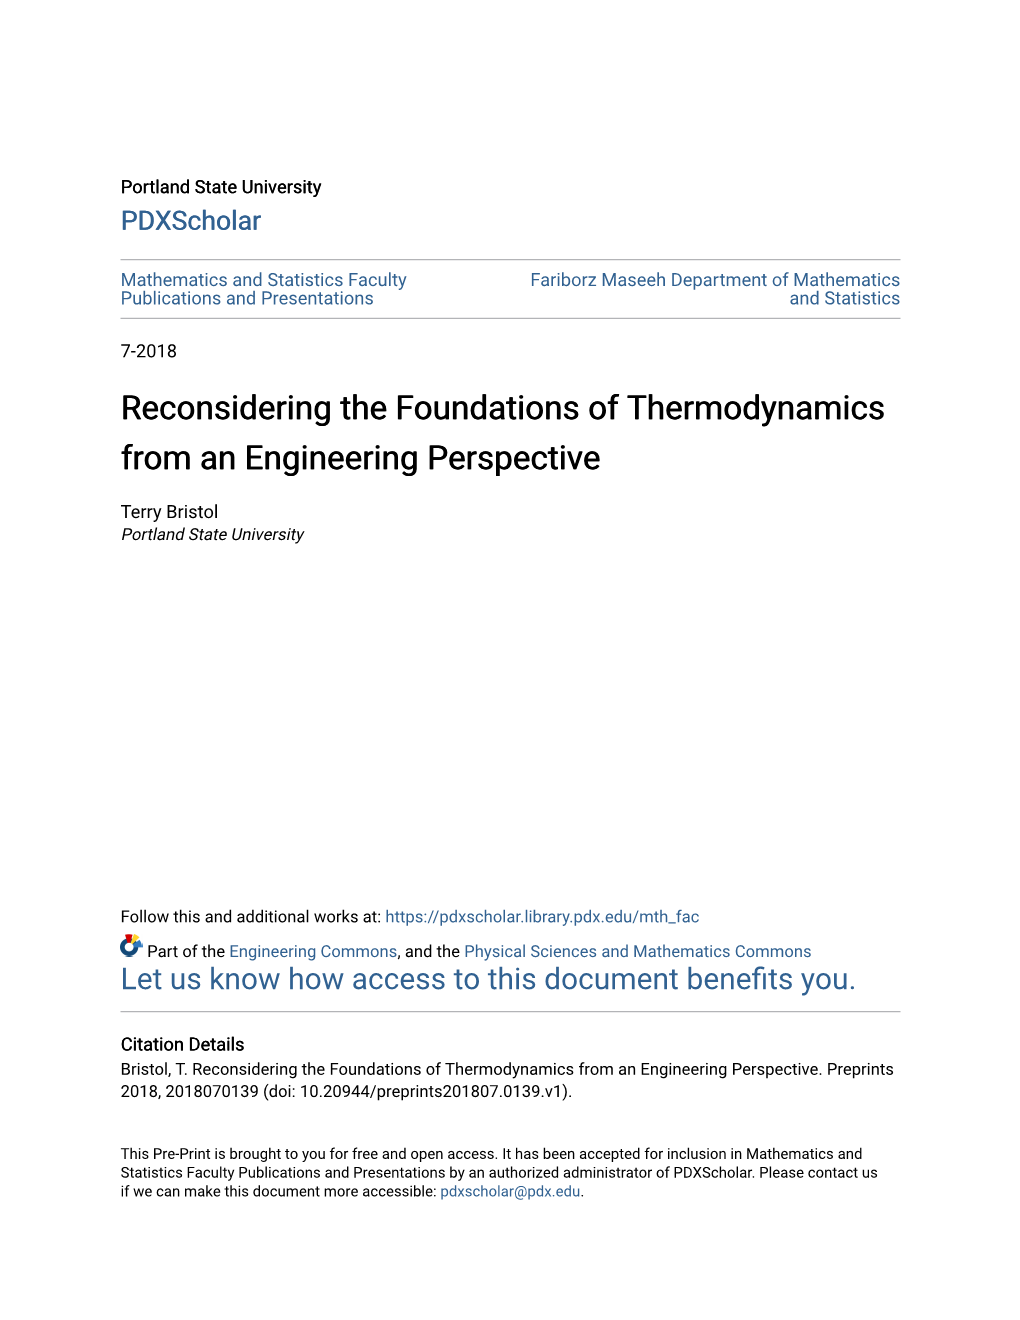 Reconsidering the Foundations of Thermodynamics from an Engineering Perspective